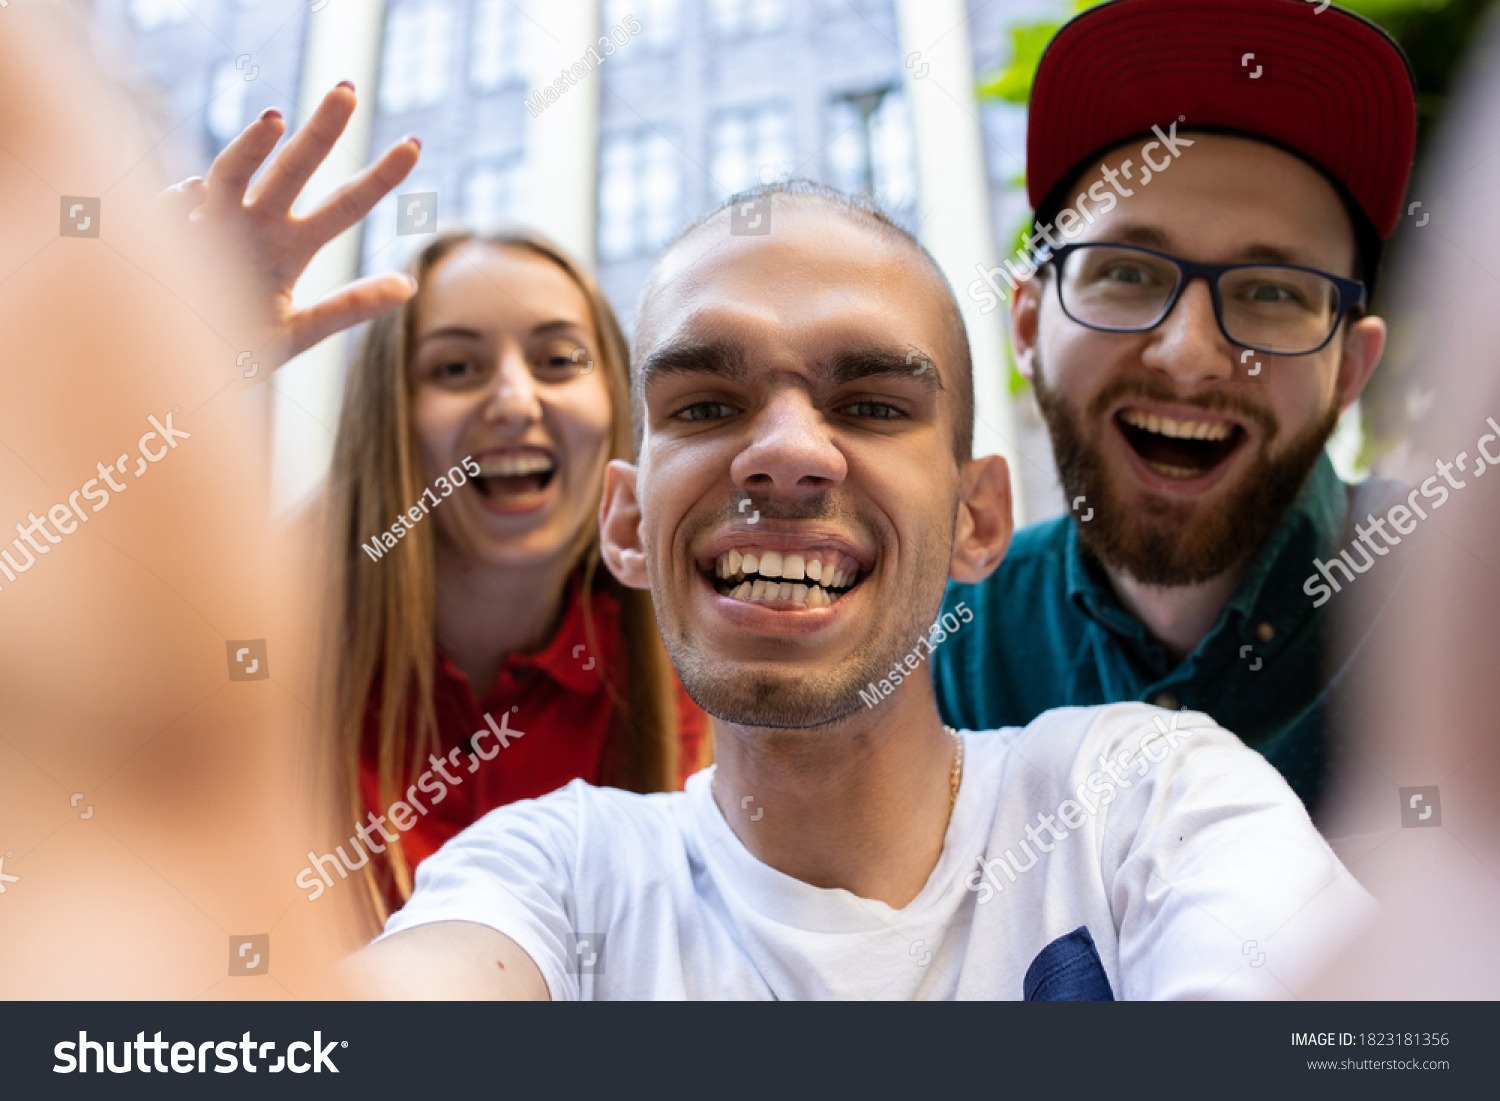 Stock Photo Group Of Friends Taking A Stroll On City S Street In Summer Day Handicapped Man With His Friends 1823181356 